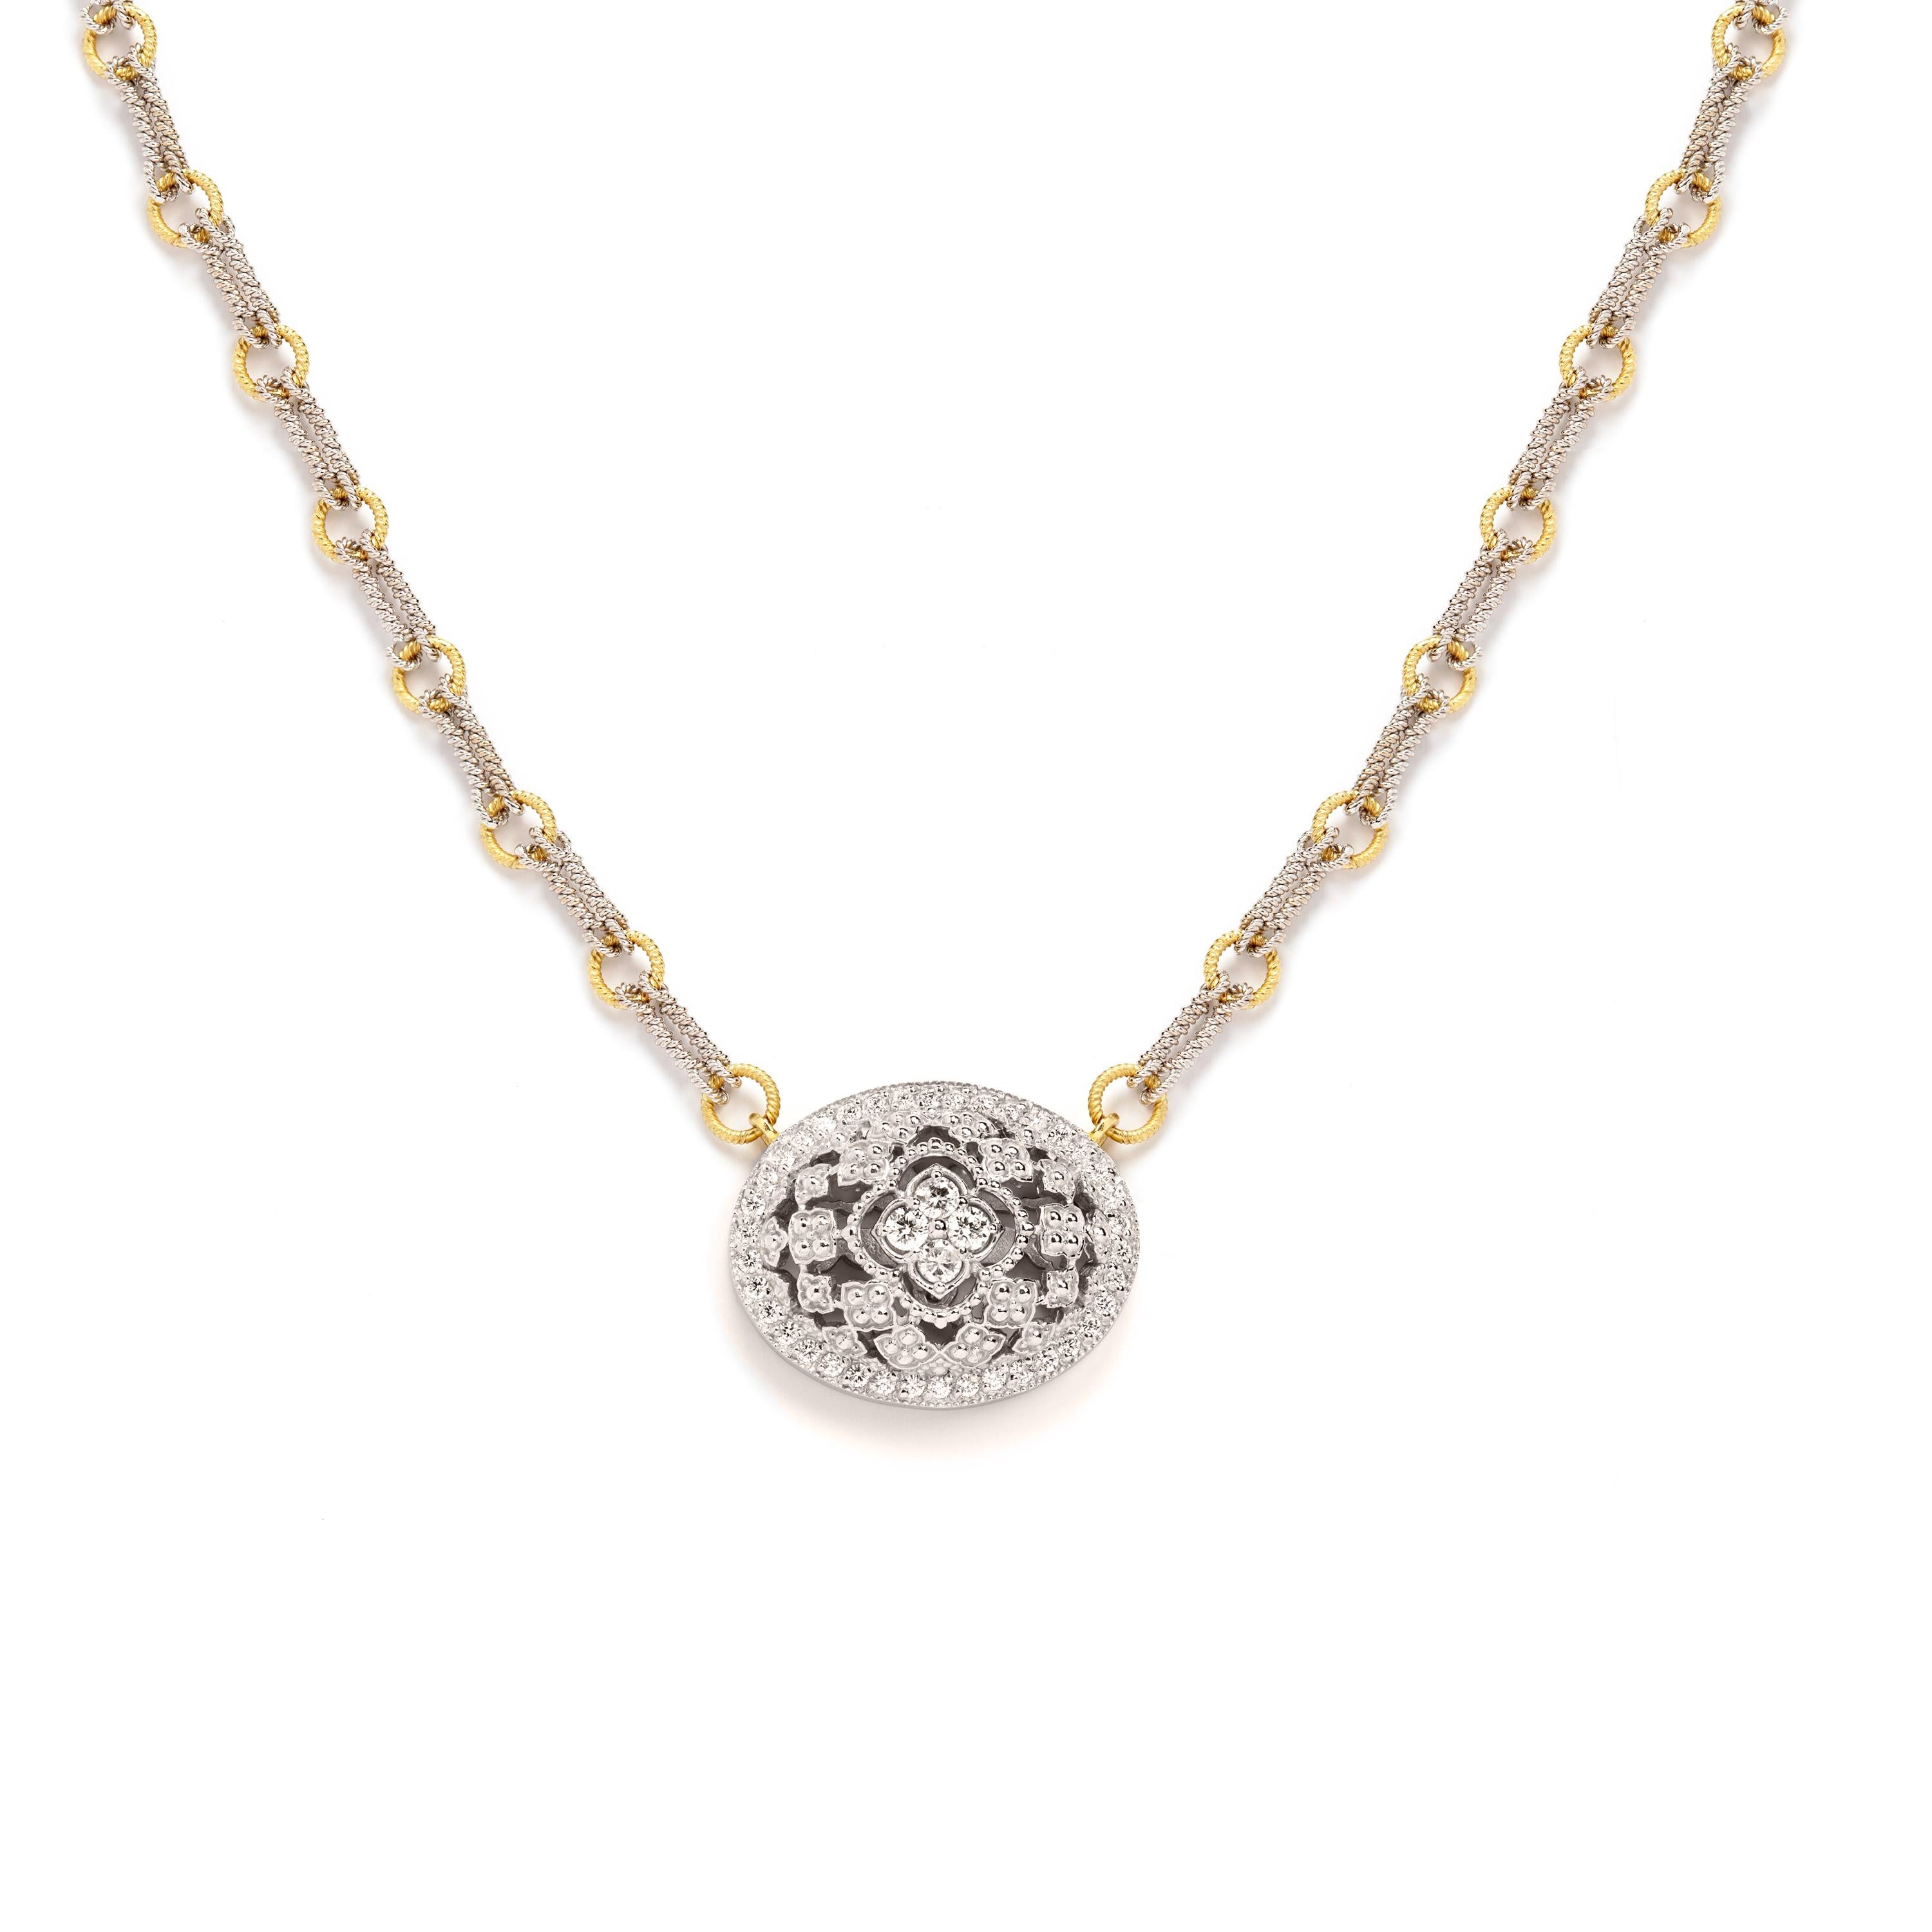 18K White and Yellow Two-Tone Gold and Diamond Oval Pendant Necklace

Incredible workmanship and design on this stunning new piece by Stambolian. Chain is made entirely by hand.

0.66 carat G color, VS clarity white diamonds

Pendant is 0.90 in. x